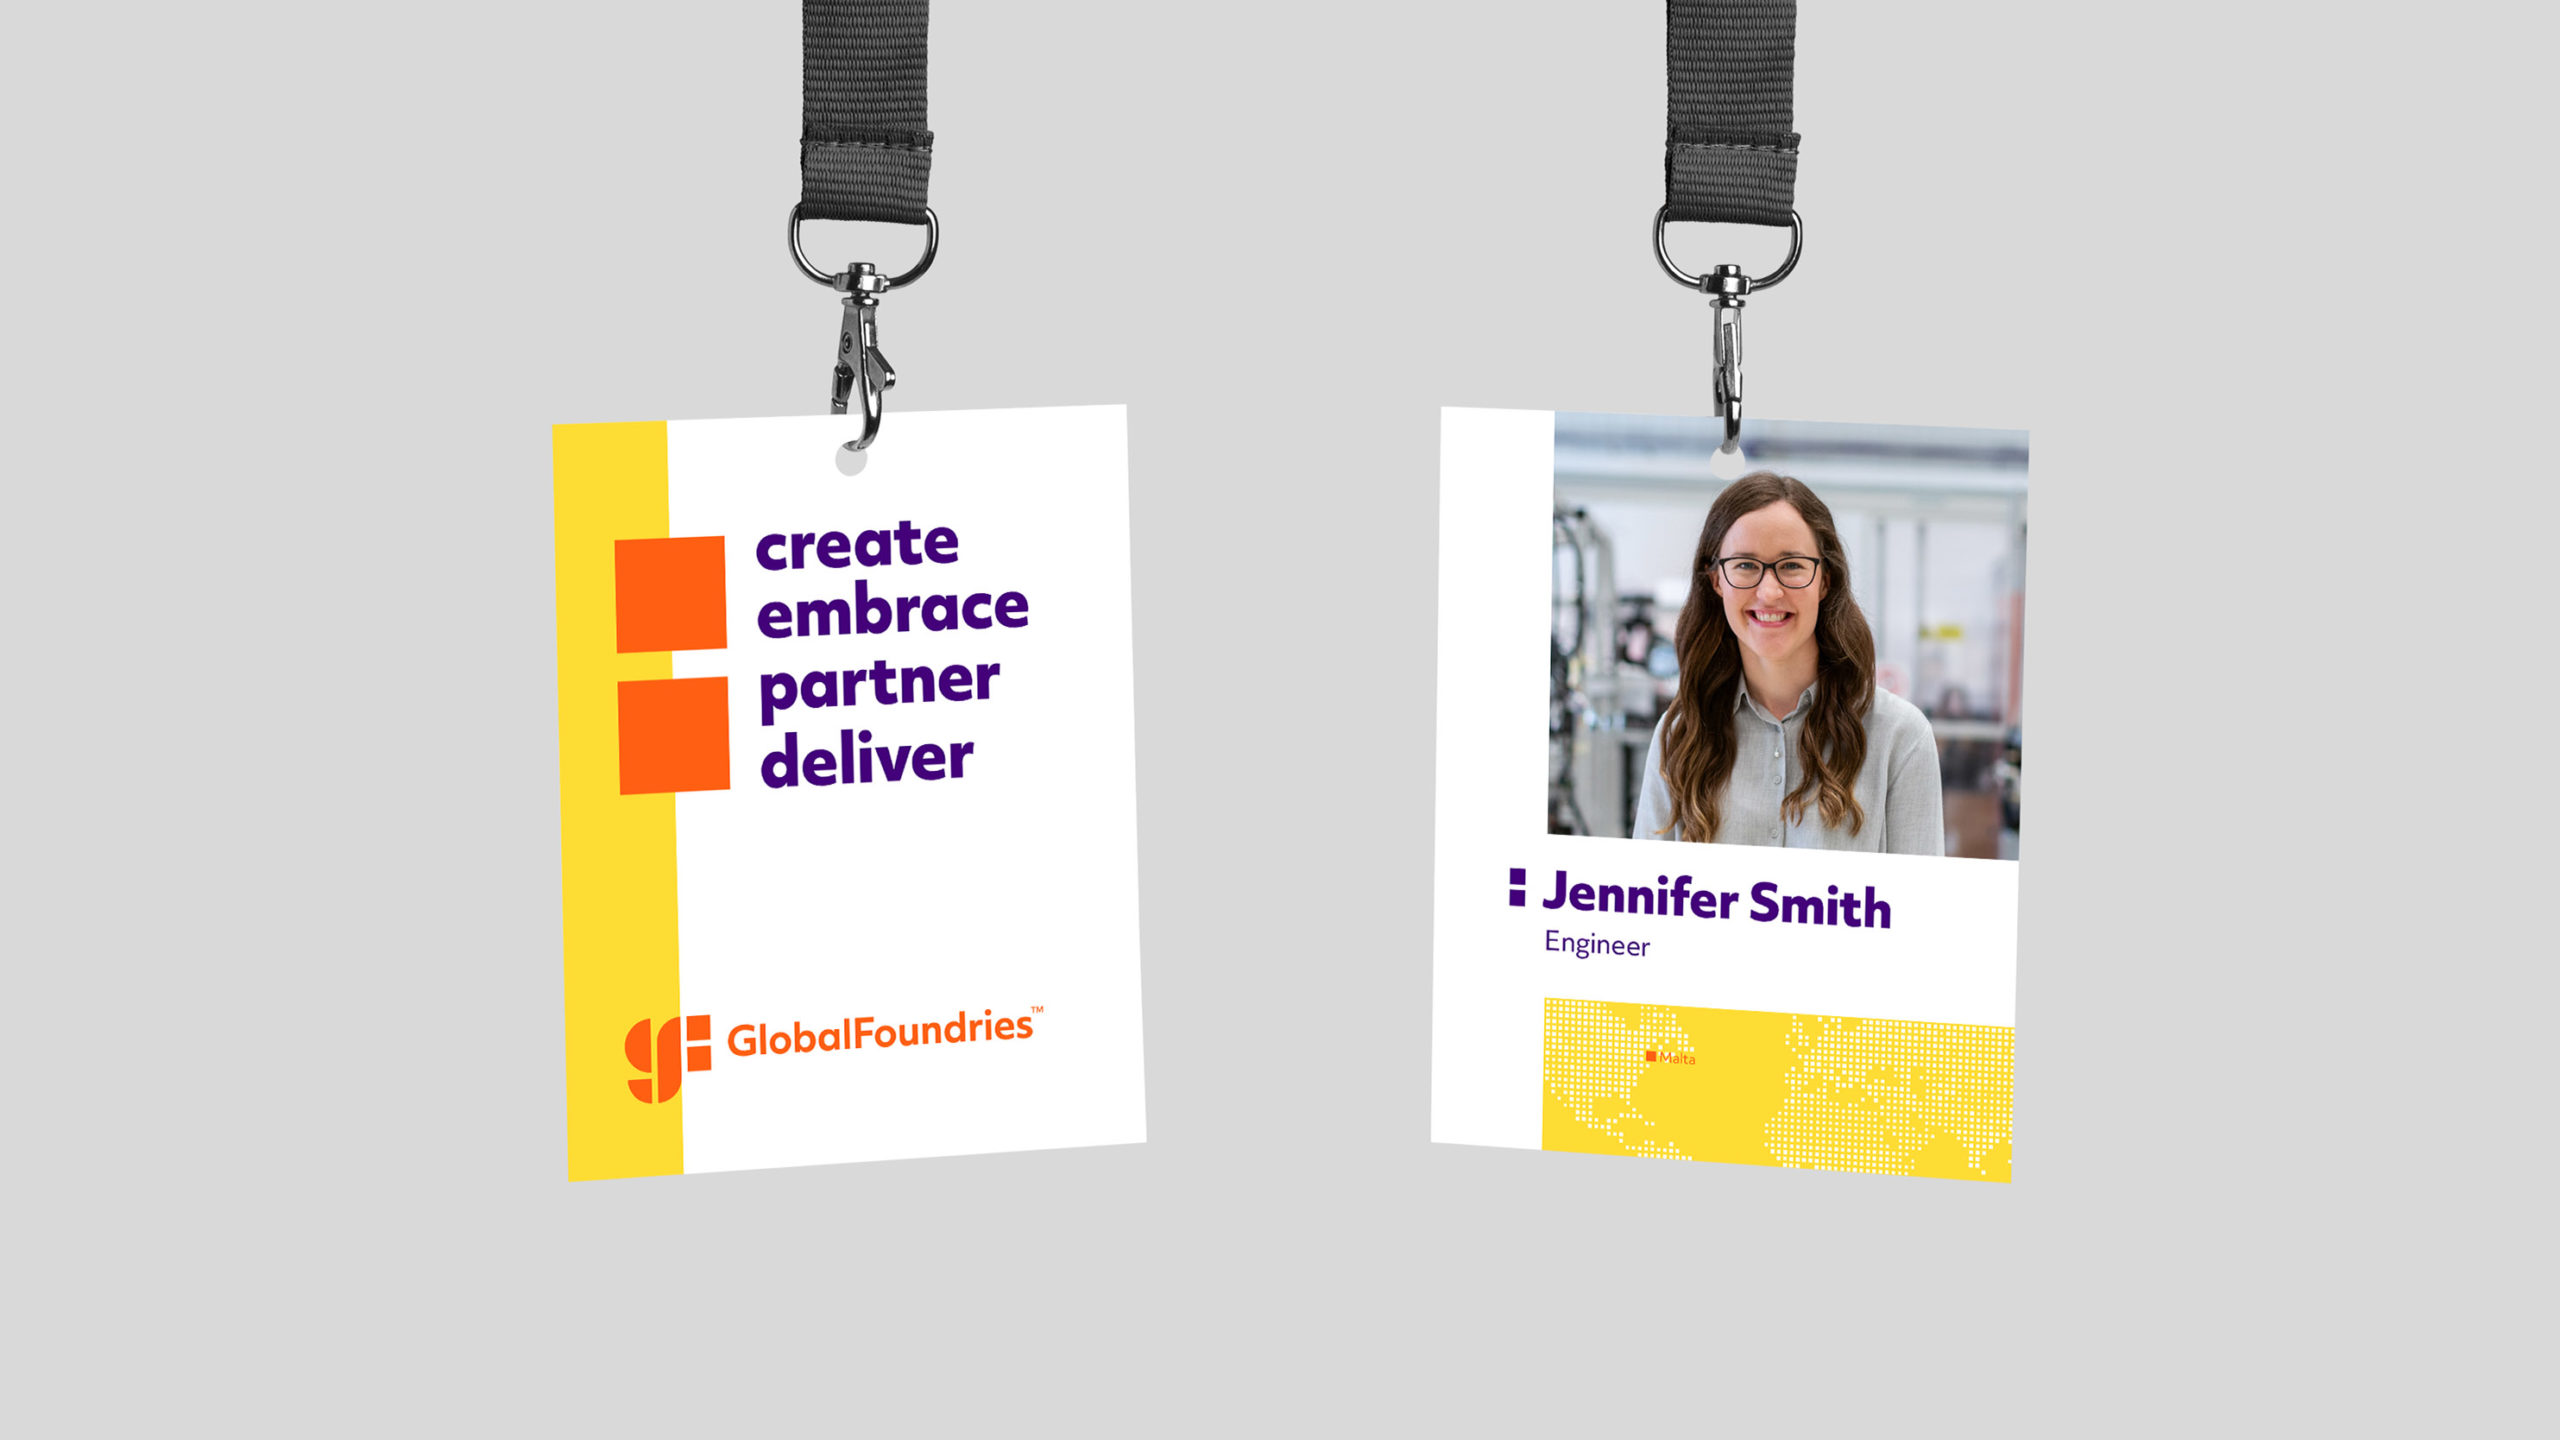 Global Foundries Badges featuring an employee and text that says “create embrace partner deliver”